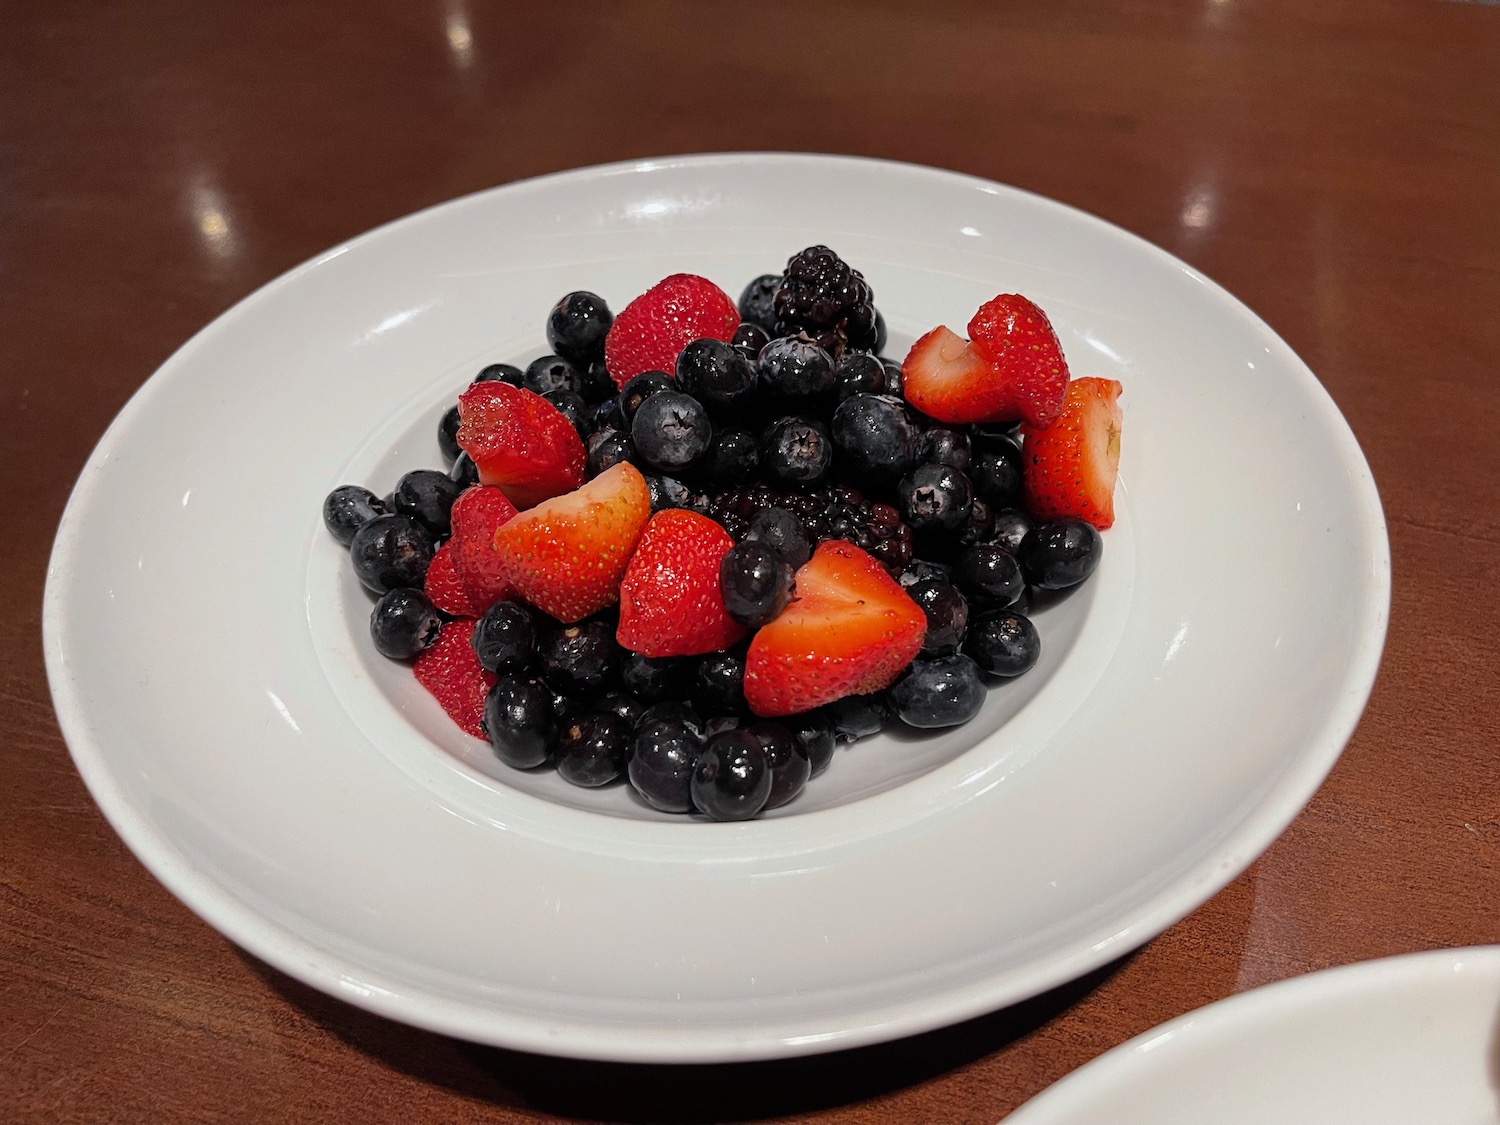 a plate of blueberries and strawberries